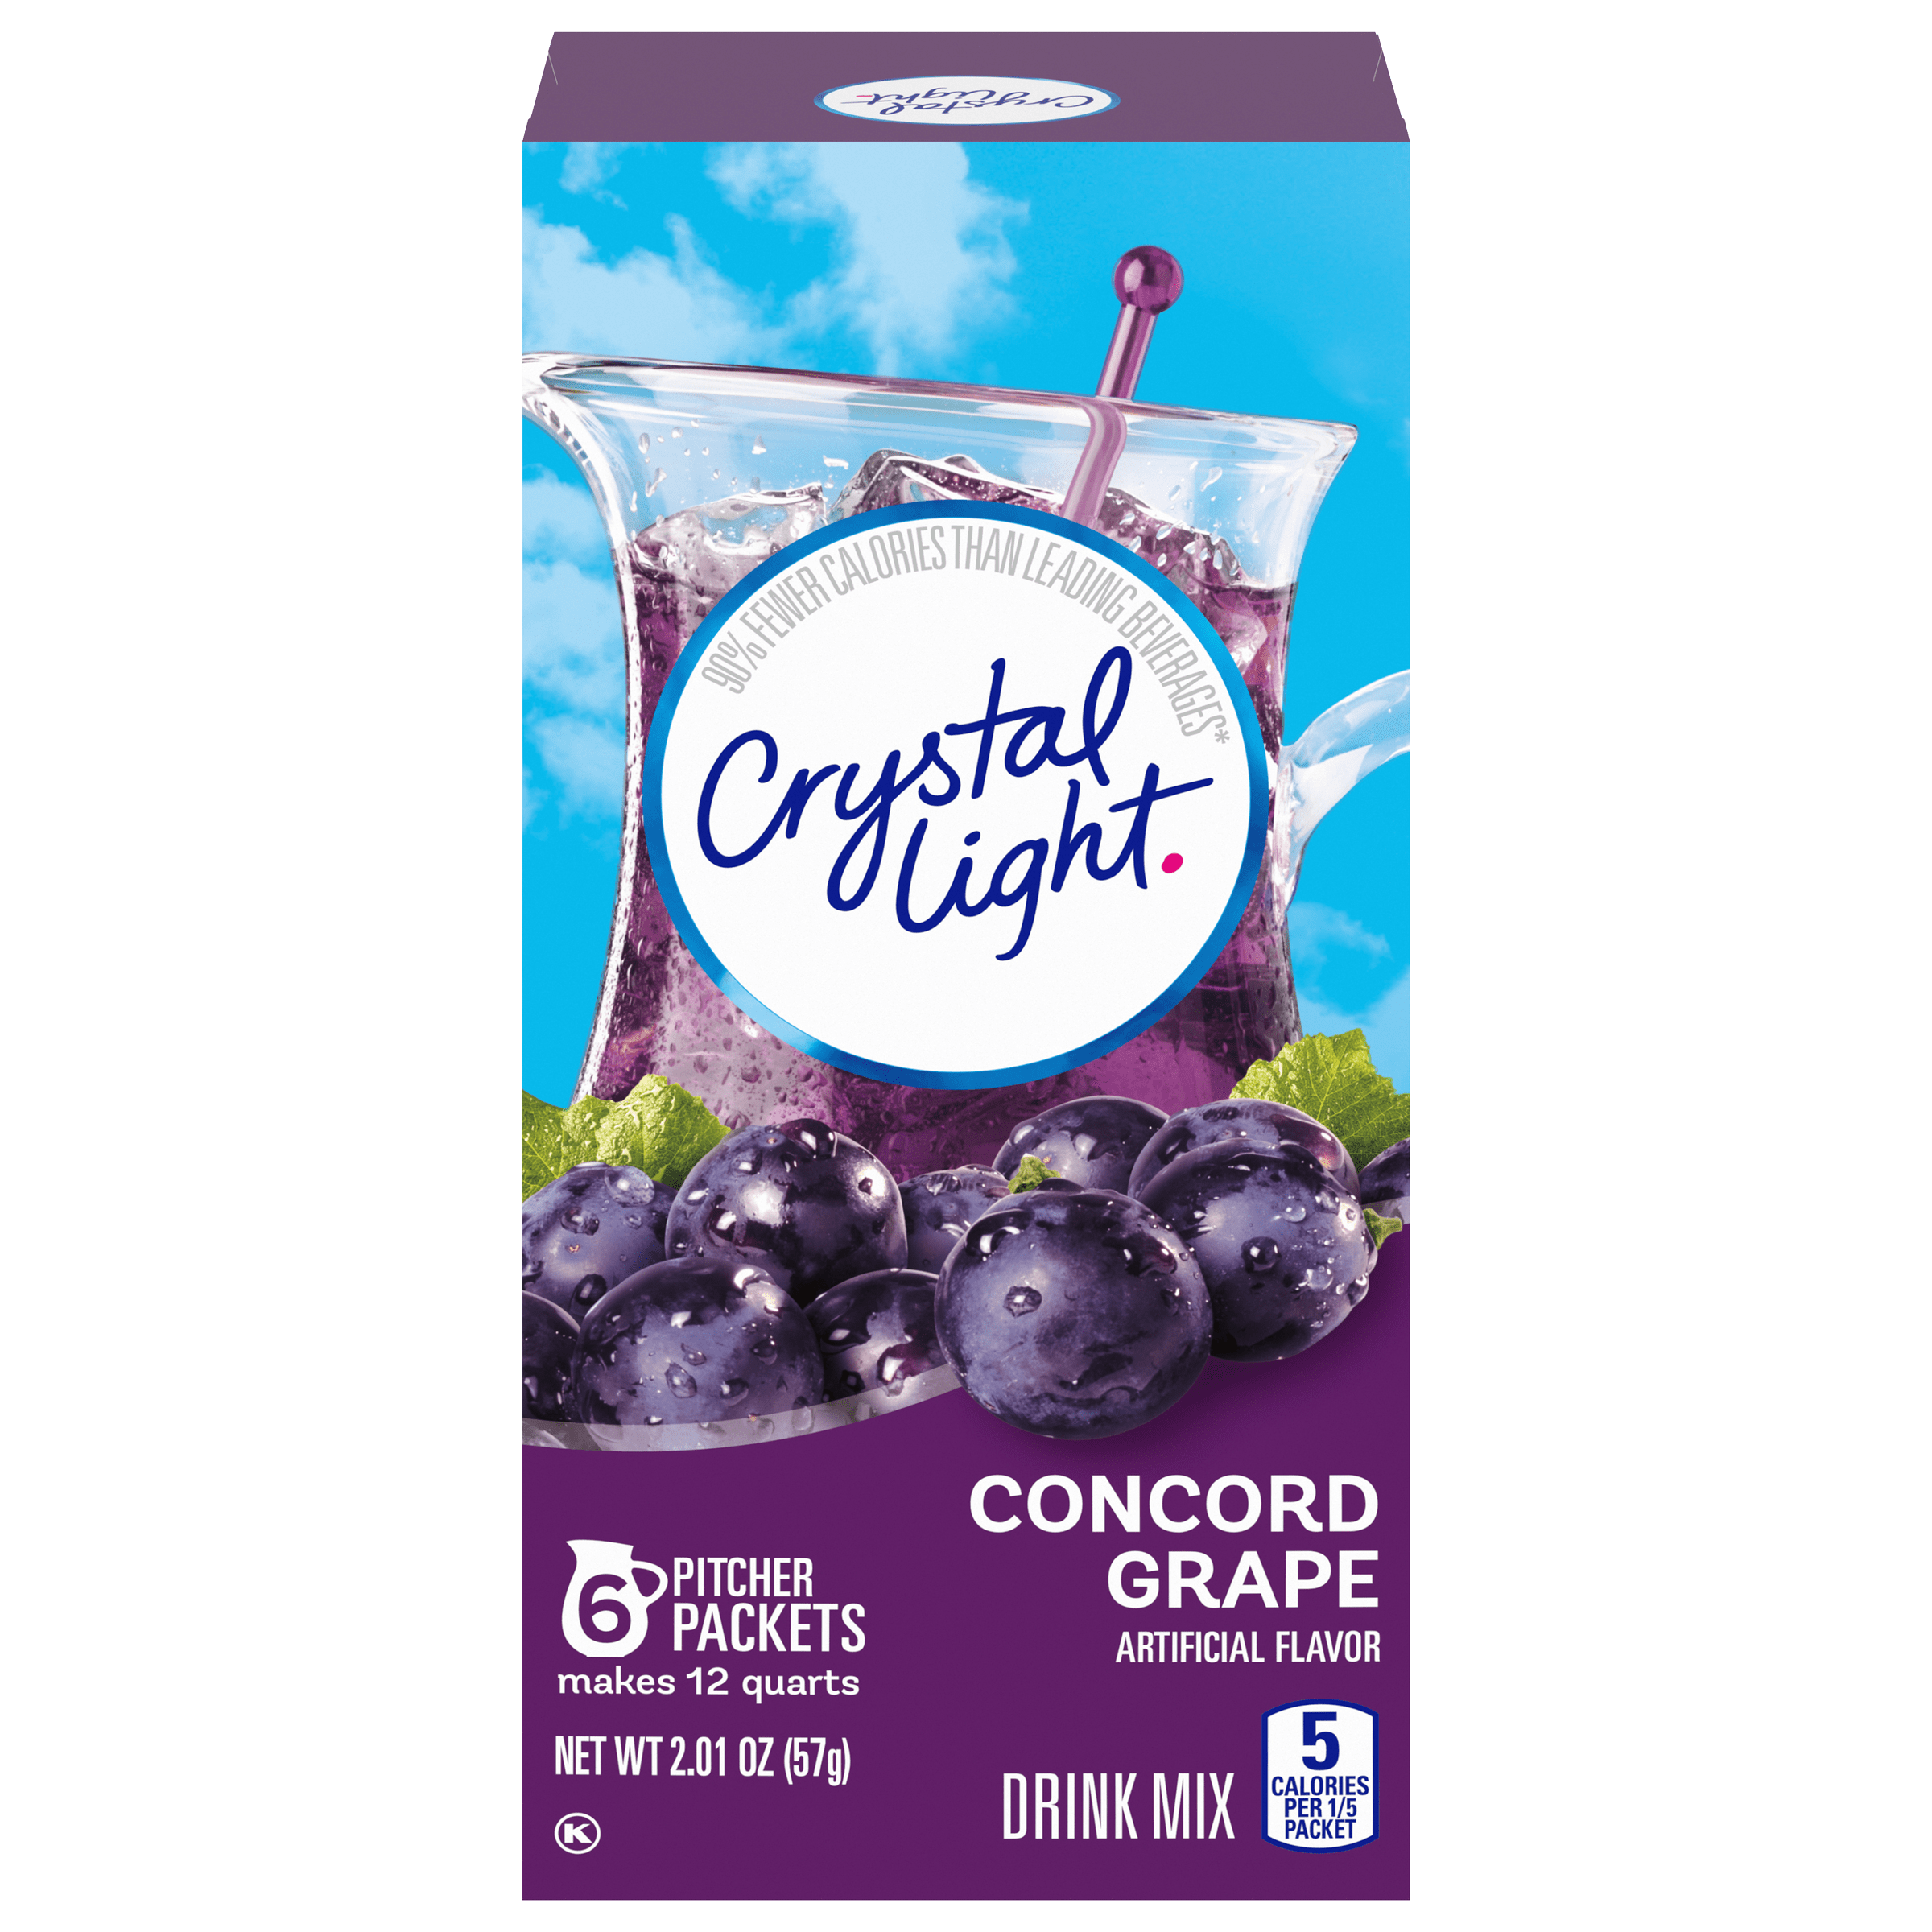 Concord Grape Artificially Flavored Powdered Drink Mix